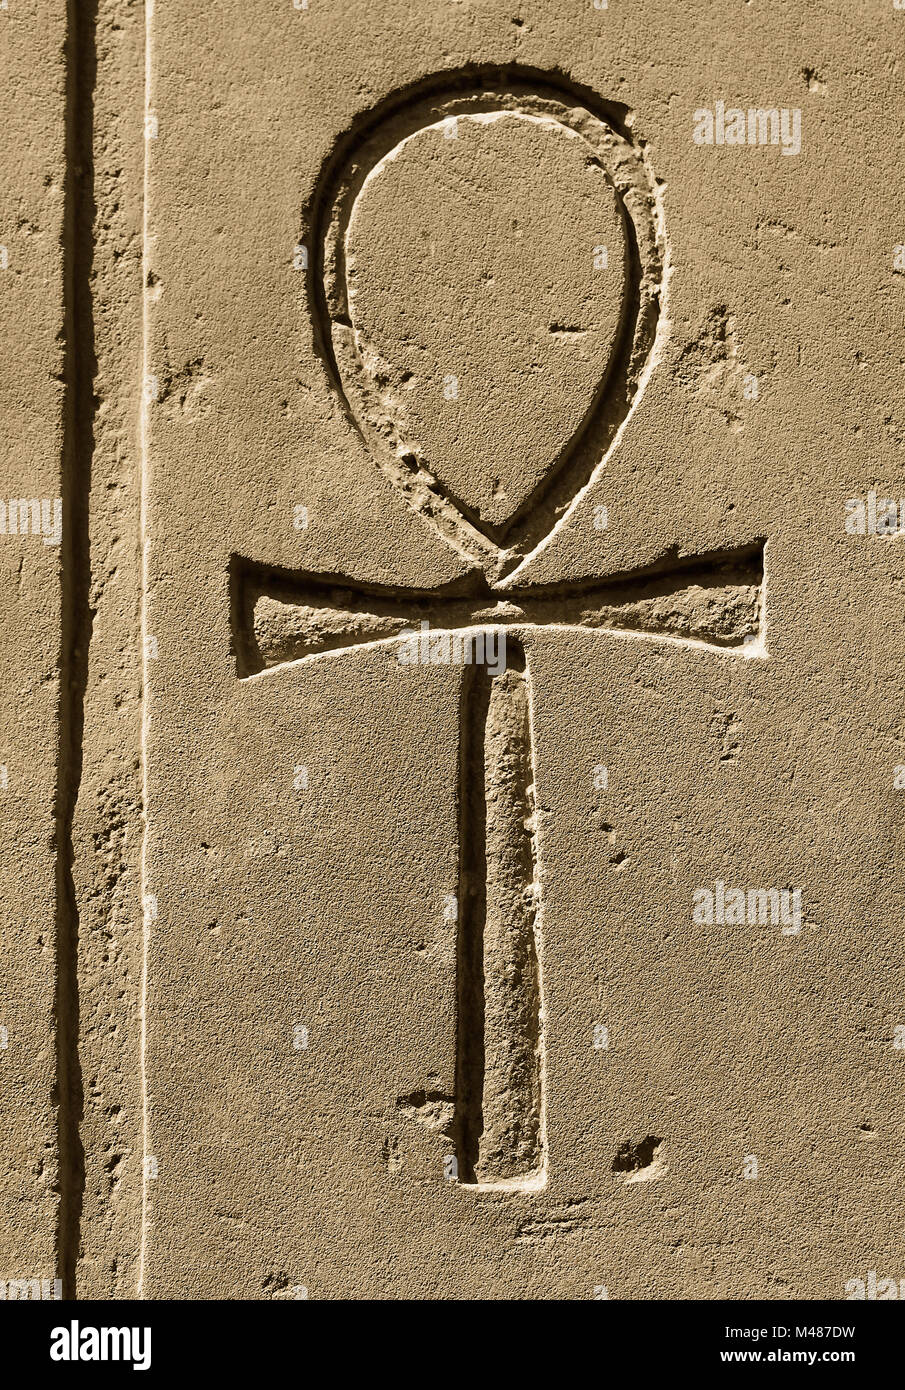 Ancient Egypt Symbol Ankh Carved On The Stone Stock Photo Alamy